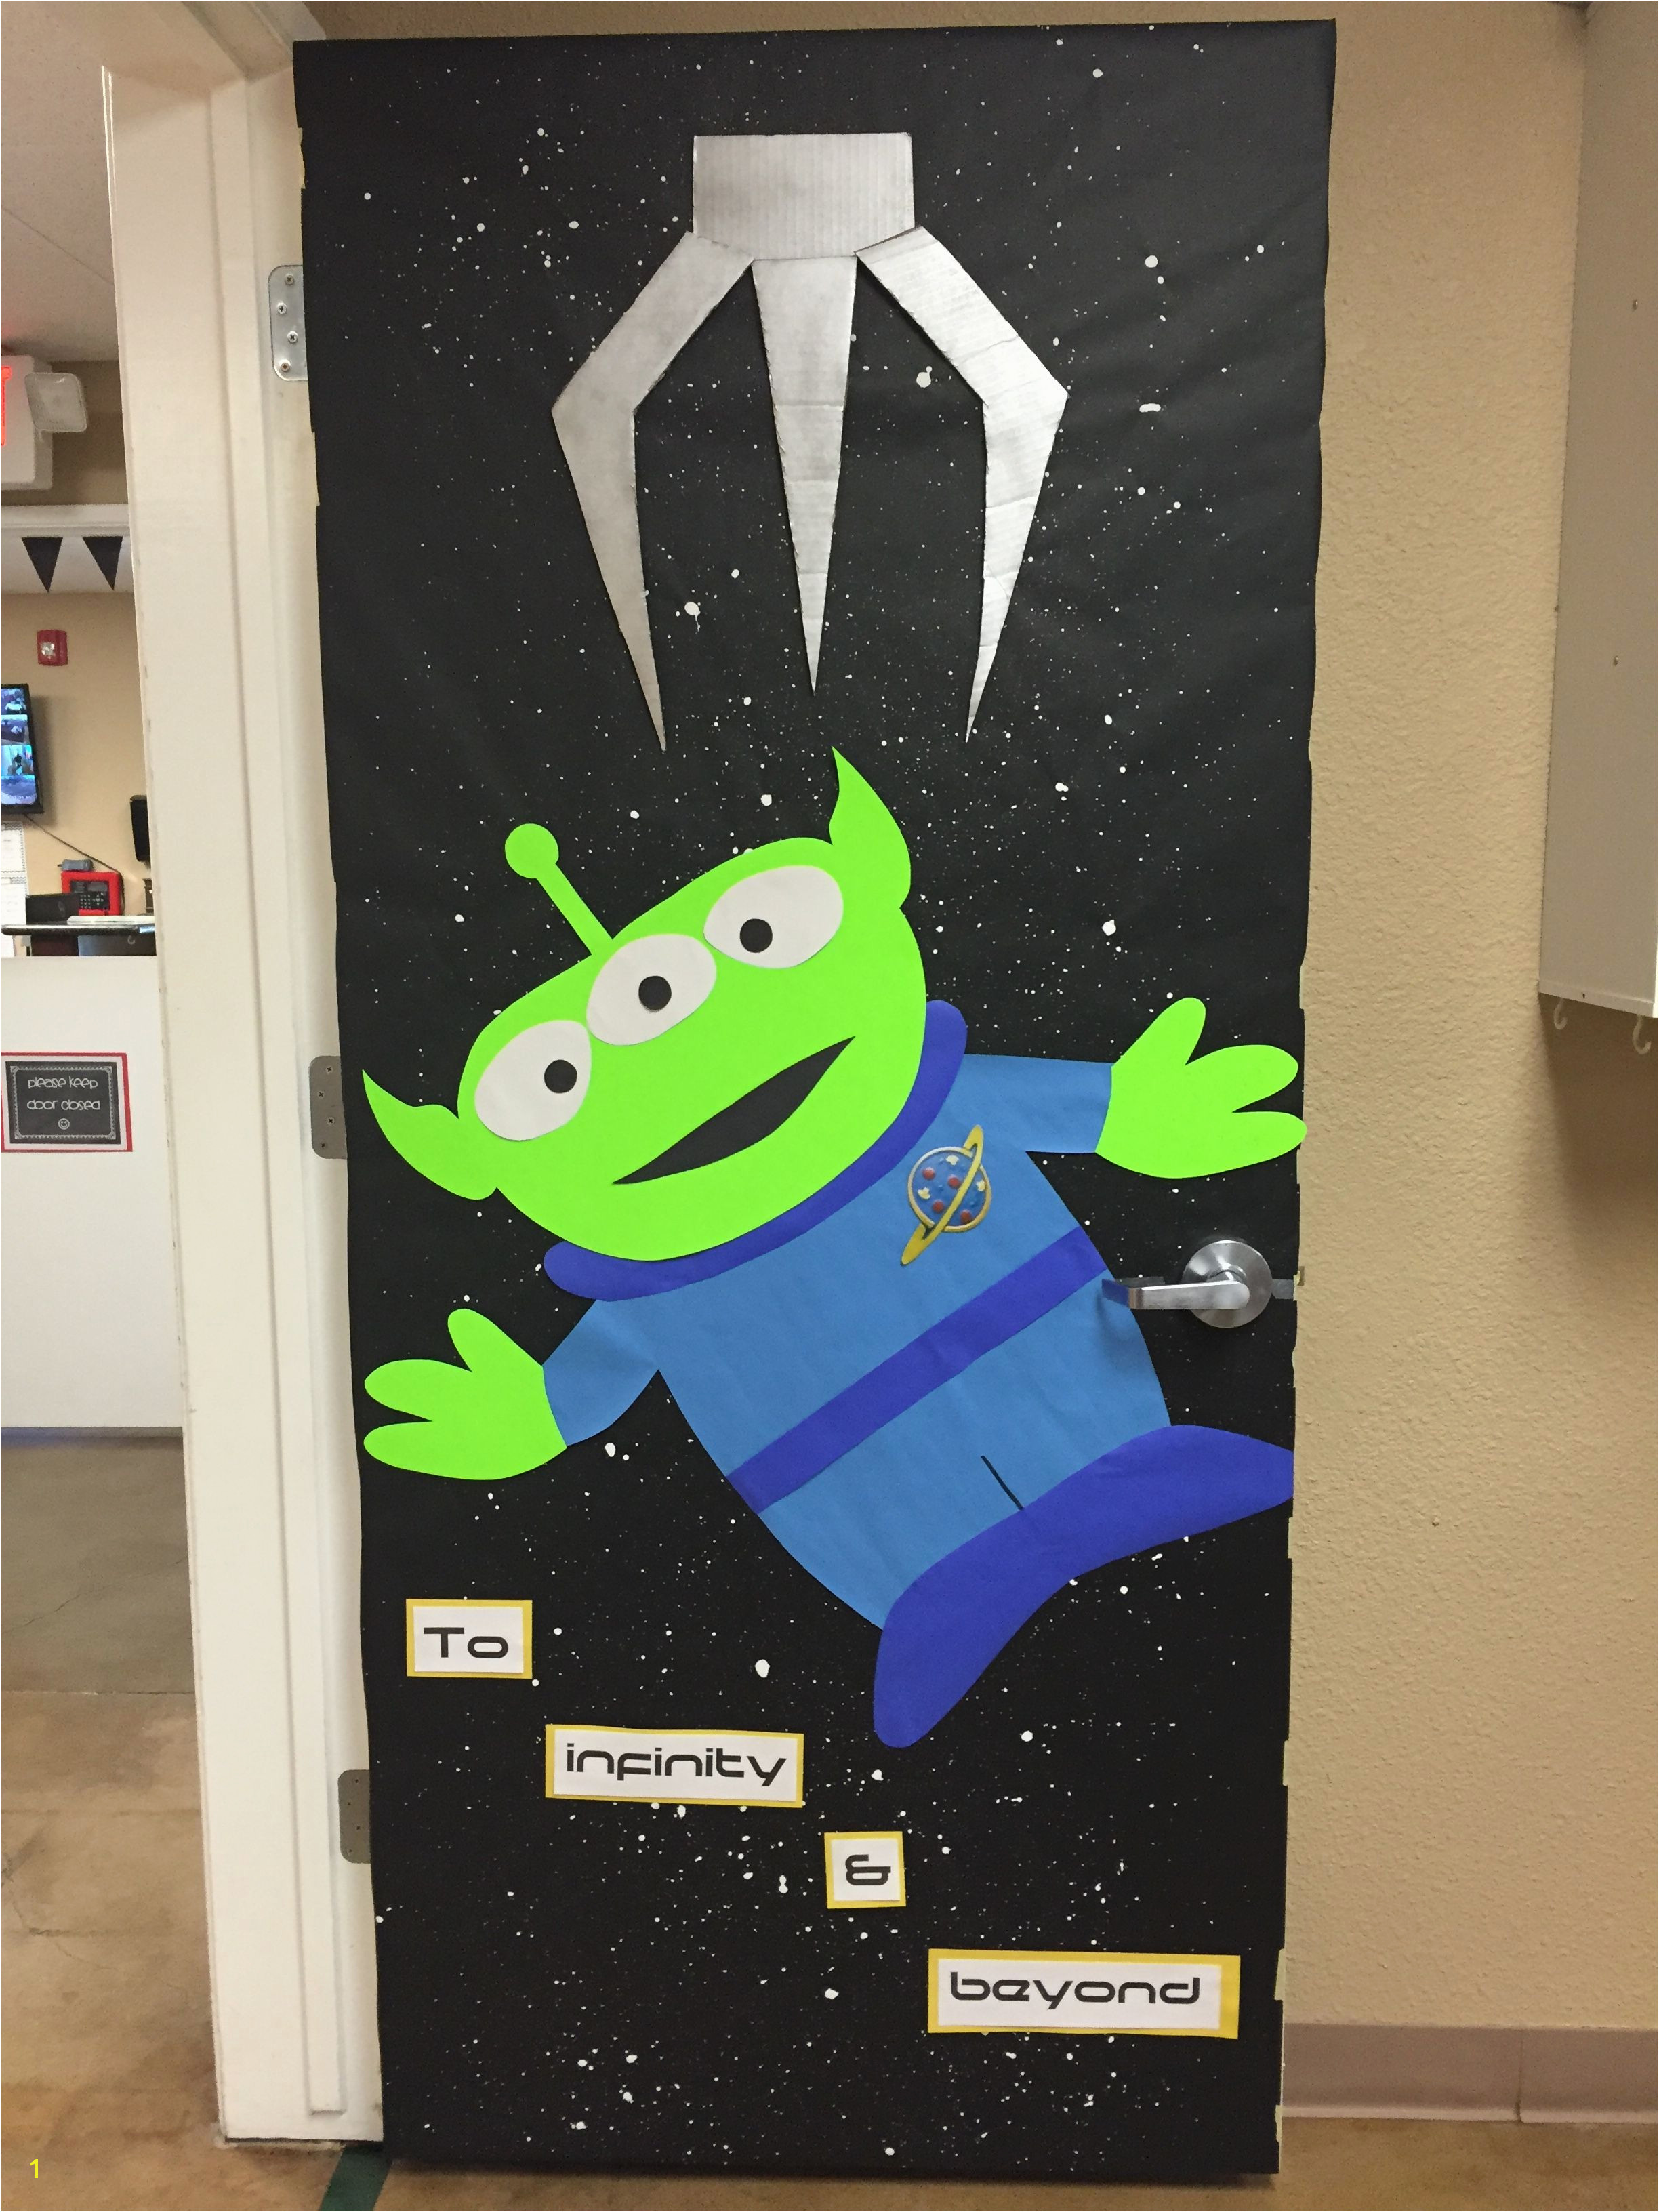 Toy Story Wall Murals toy Story Alien Door for Space theme … Spirit Night Maresca